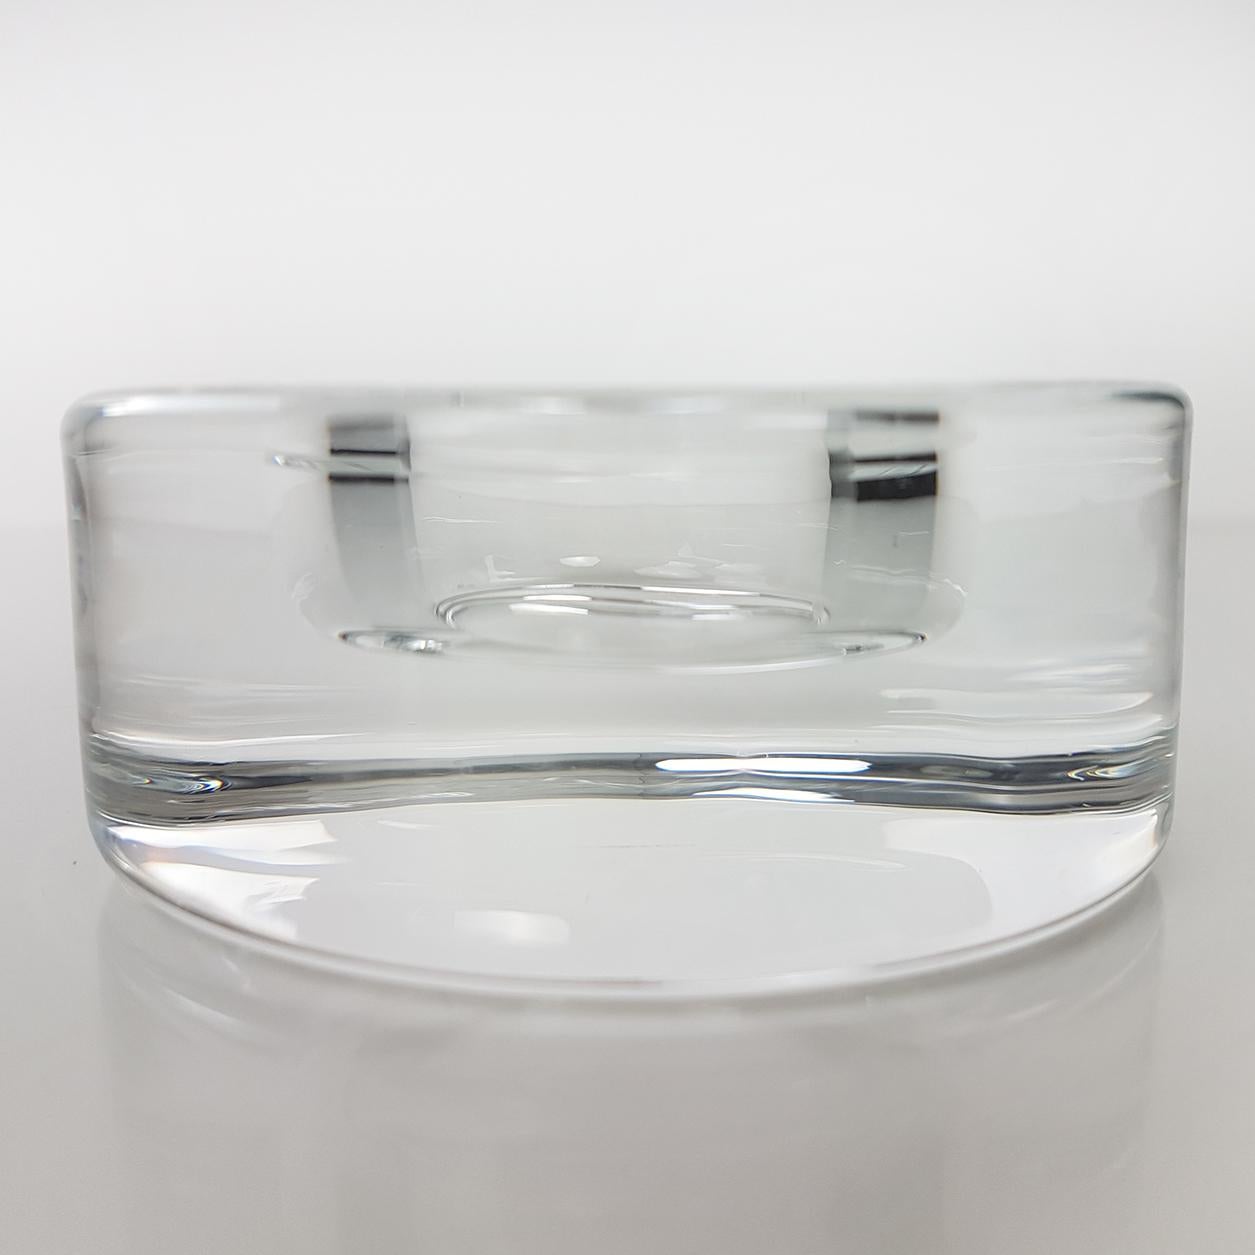 Late 20th Century Set of Three Crystal Glass Votive Candleholders by Kosta Boda for Orrefors